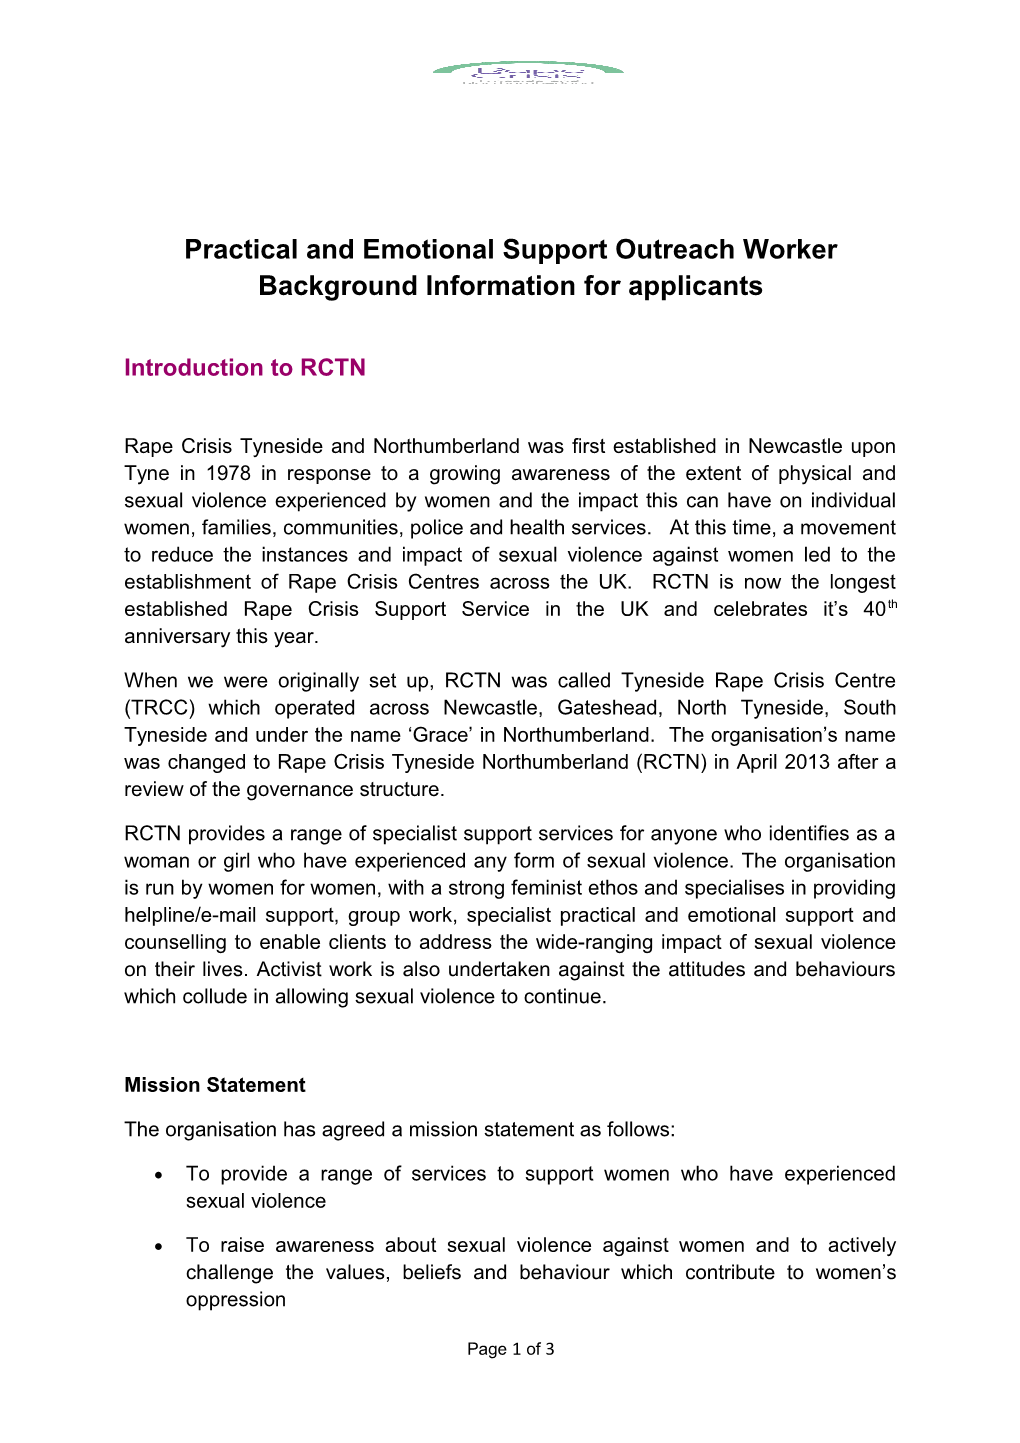 Practical and Emotional Support Outreach Worker